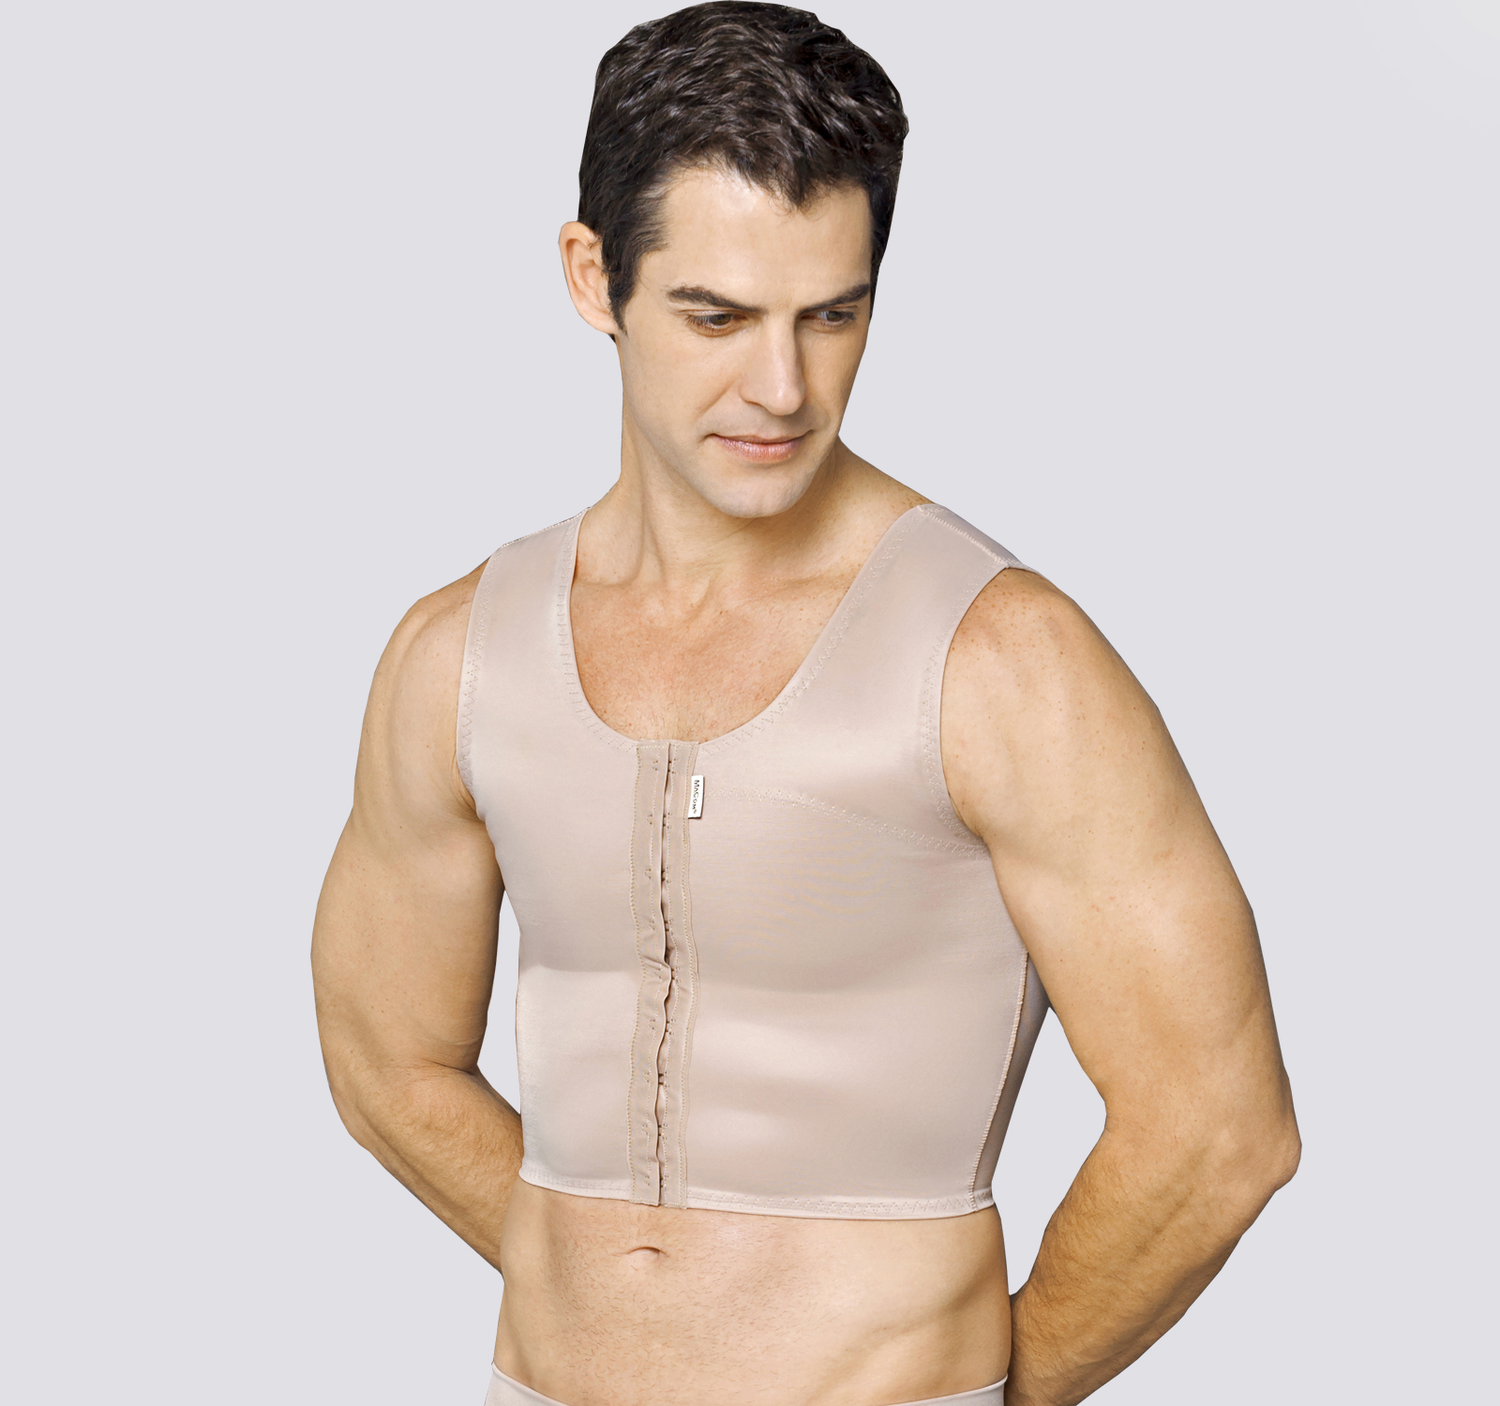 medical compression garment after tummy tuck & liposuction surgery – Emarco  Medical